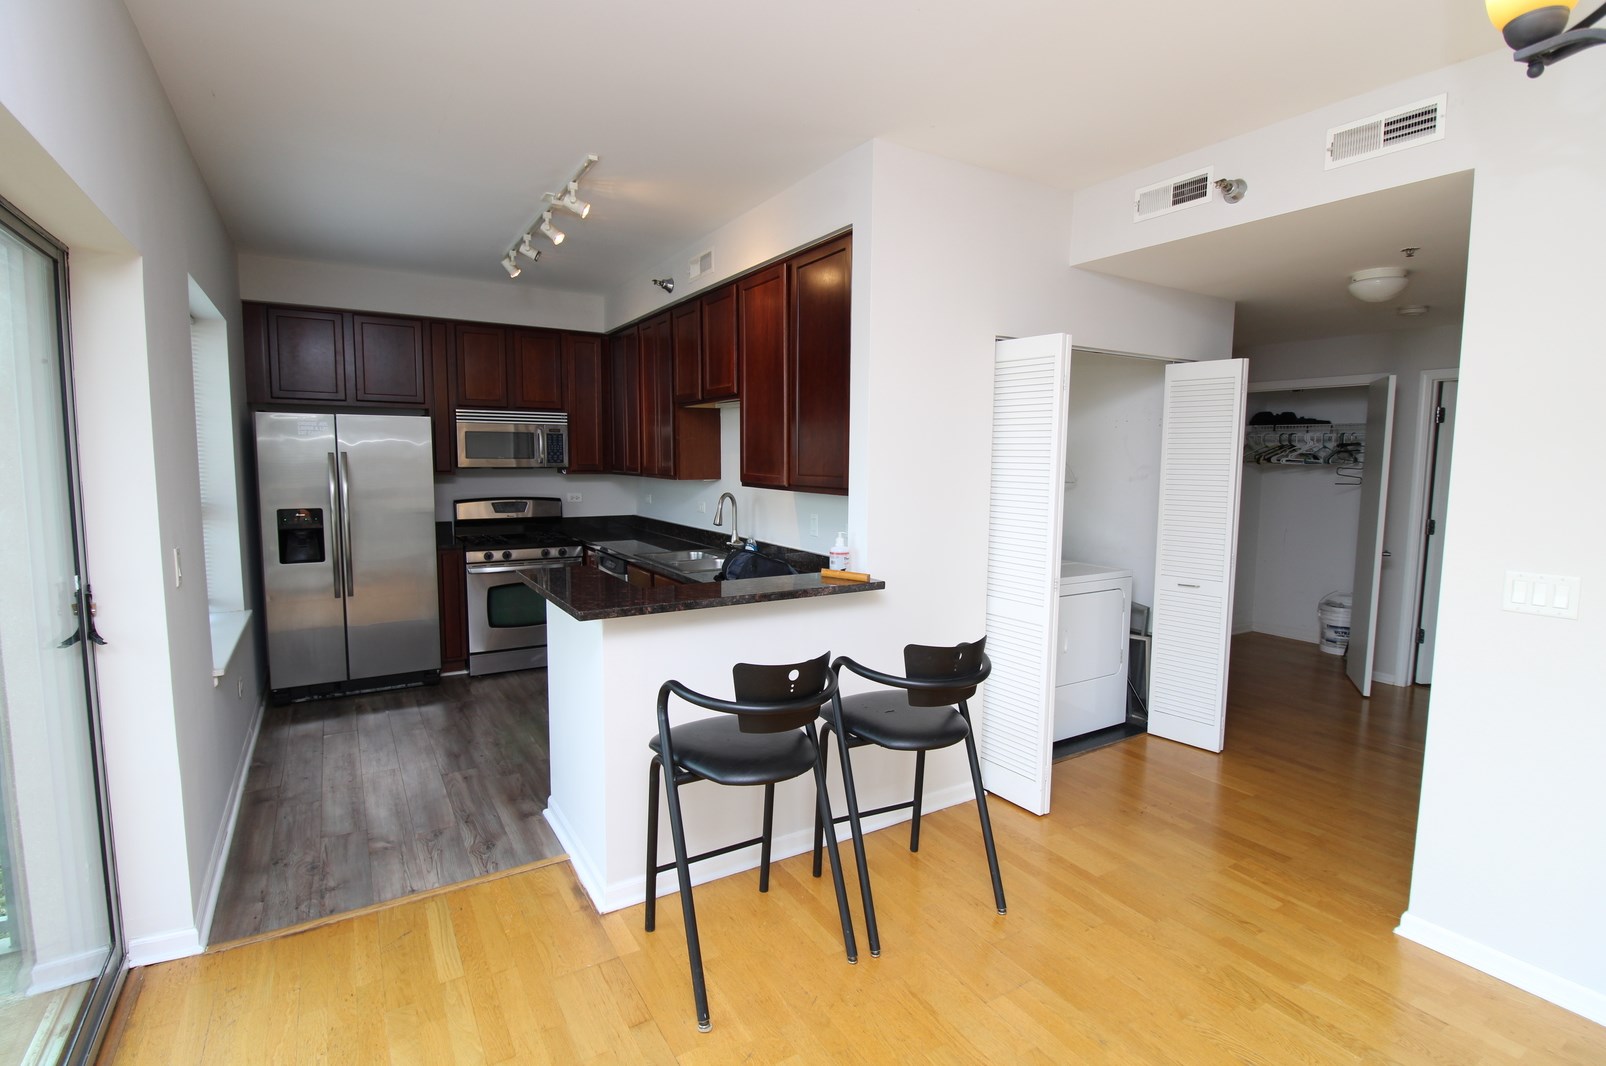 100 N Hermitage Ave Unit 508, Chicago, IL 60612